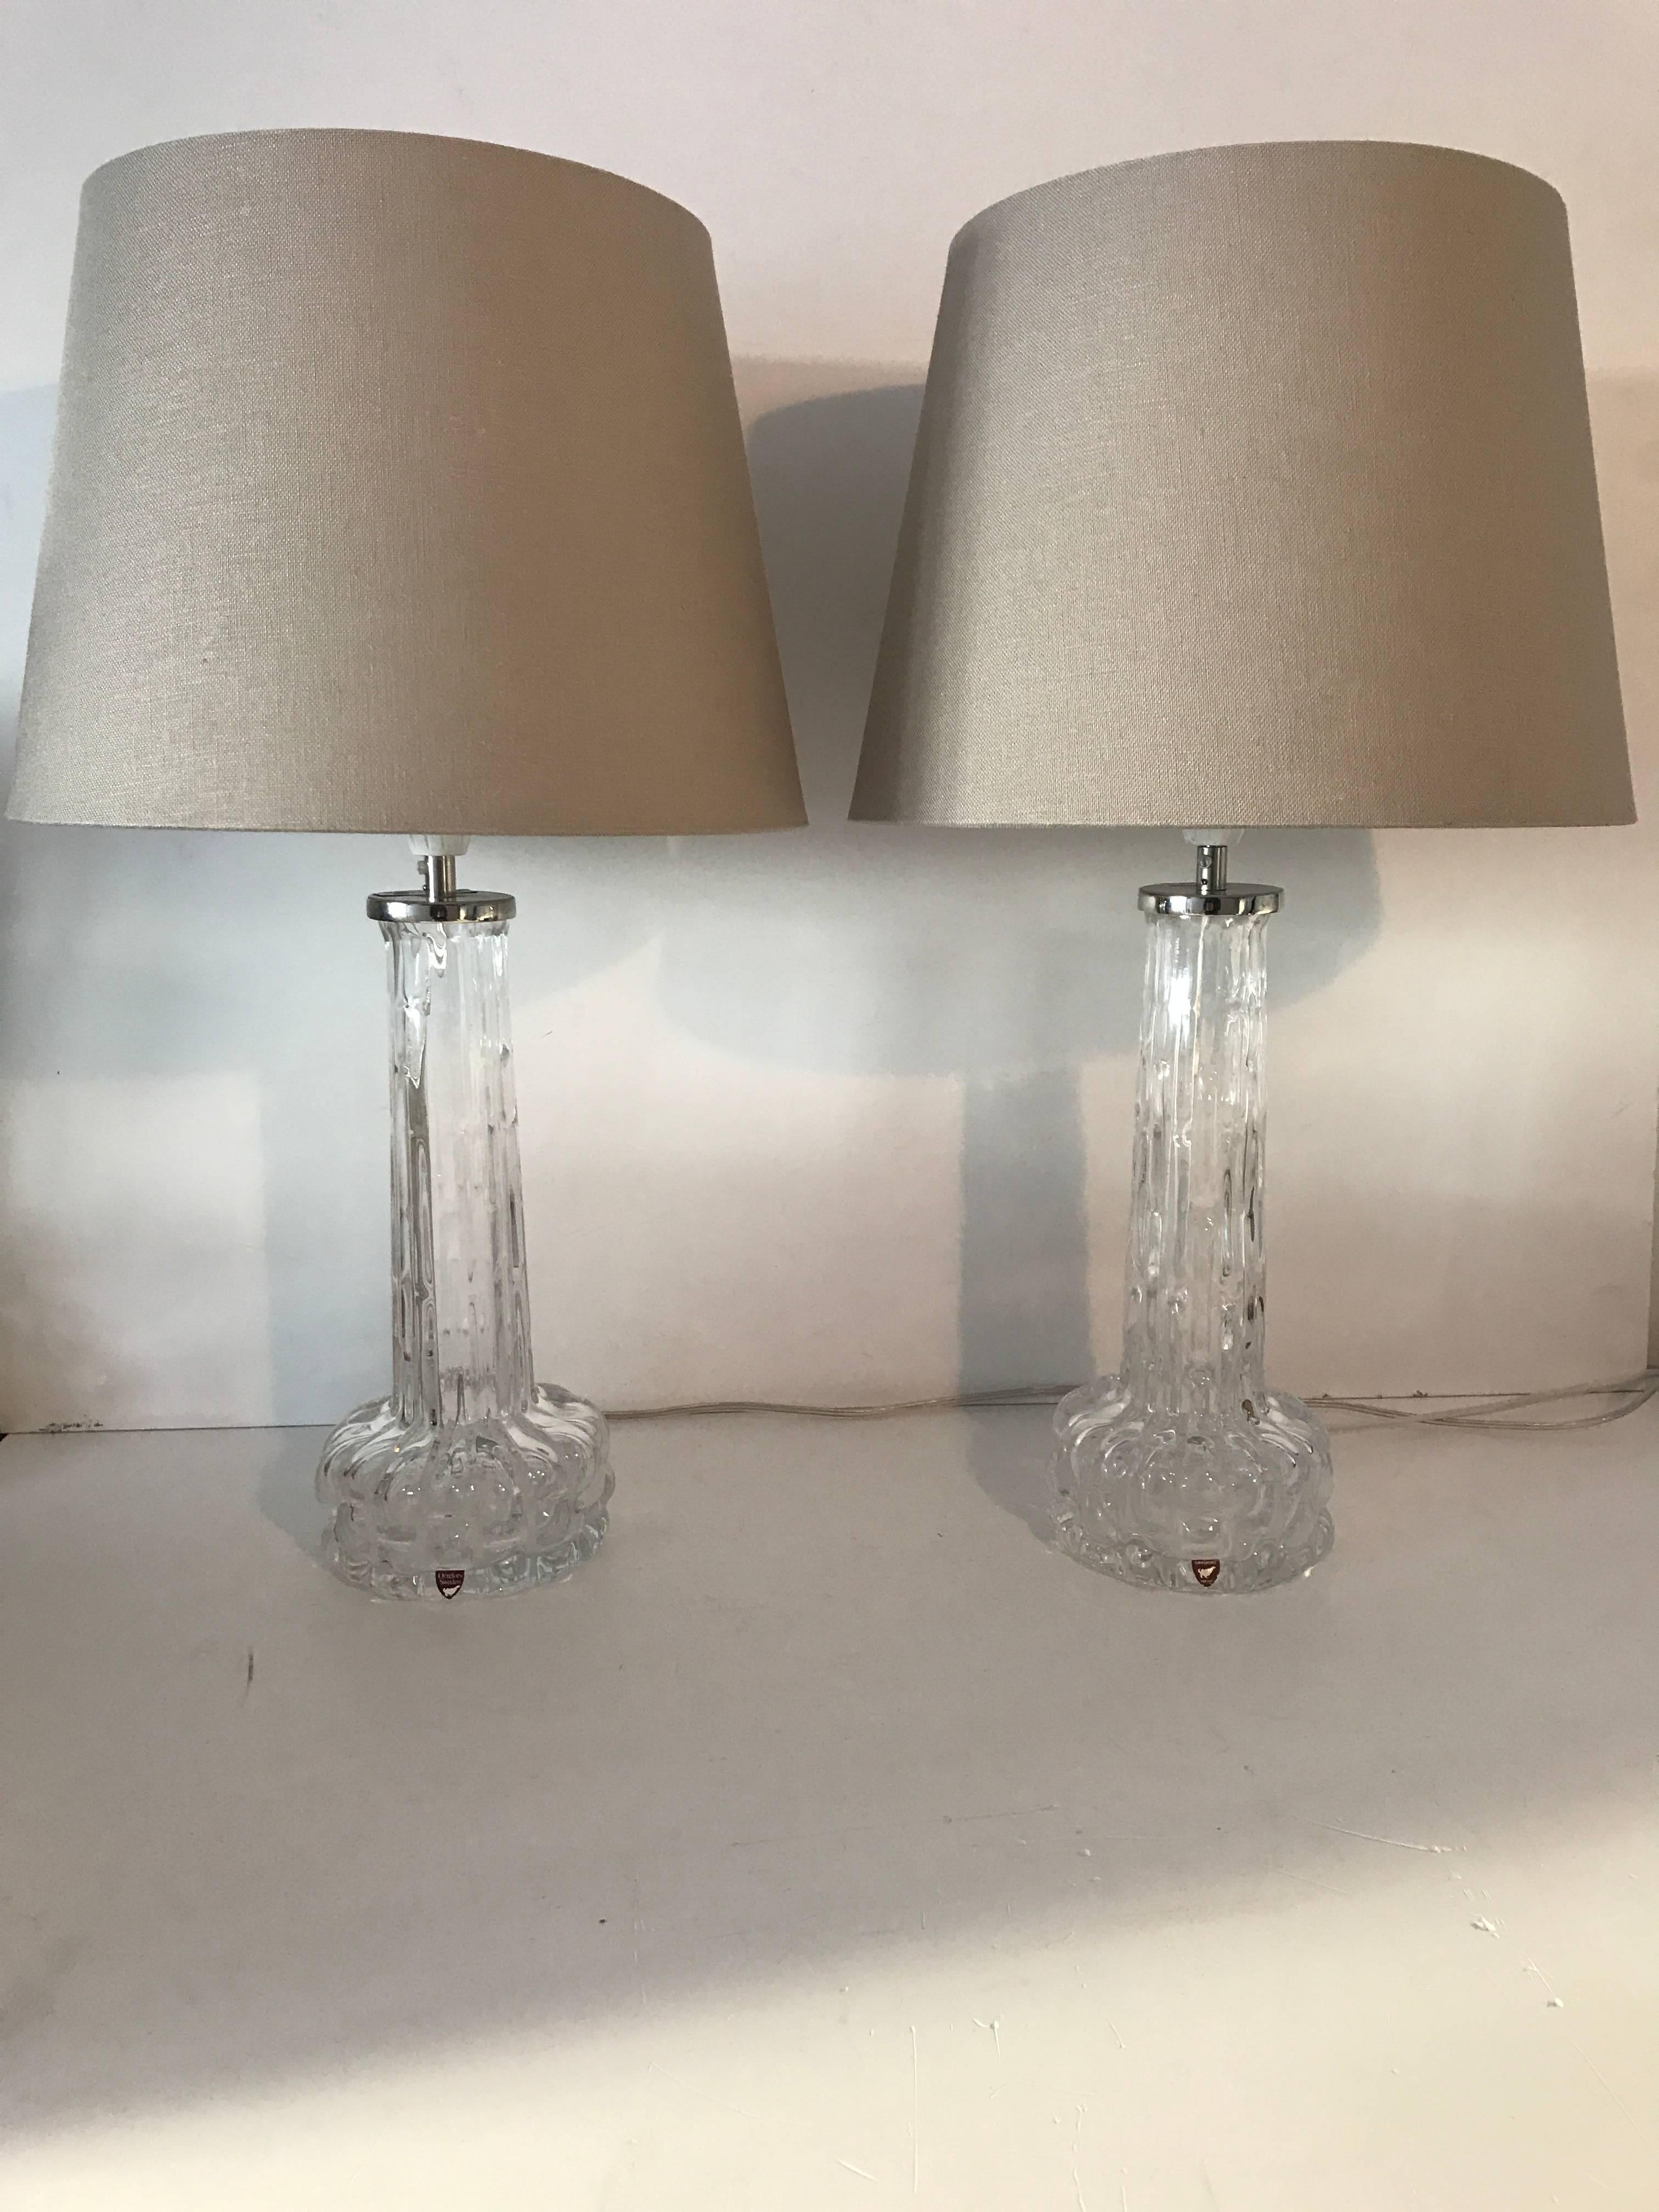 Scandinavian Modern Swedish Orrefors 1955 Art Glass Table Lamps by Carl Fagerlund For Sale